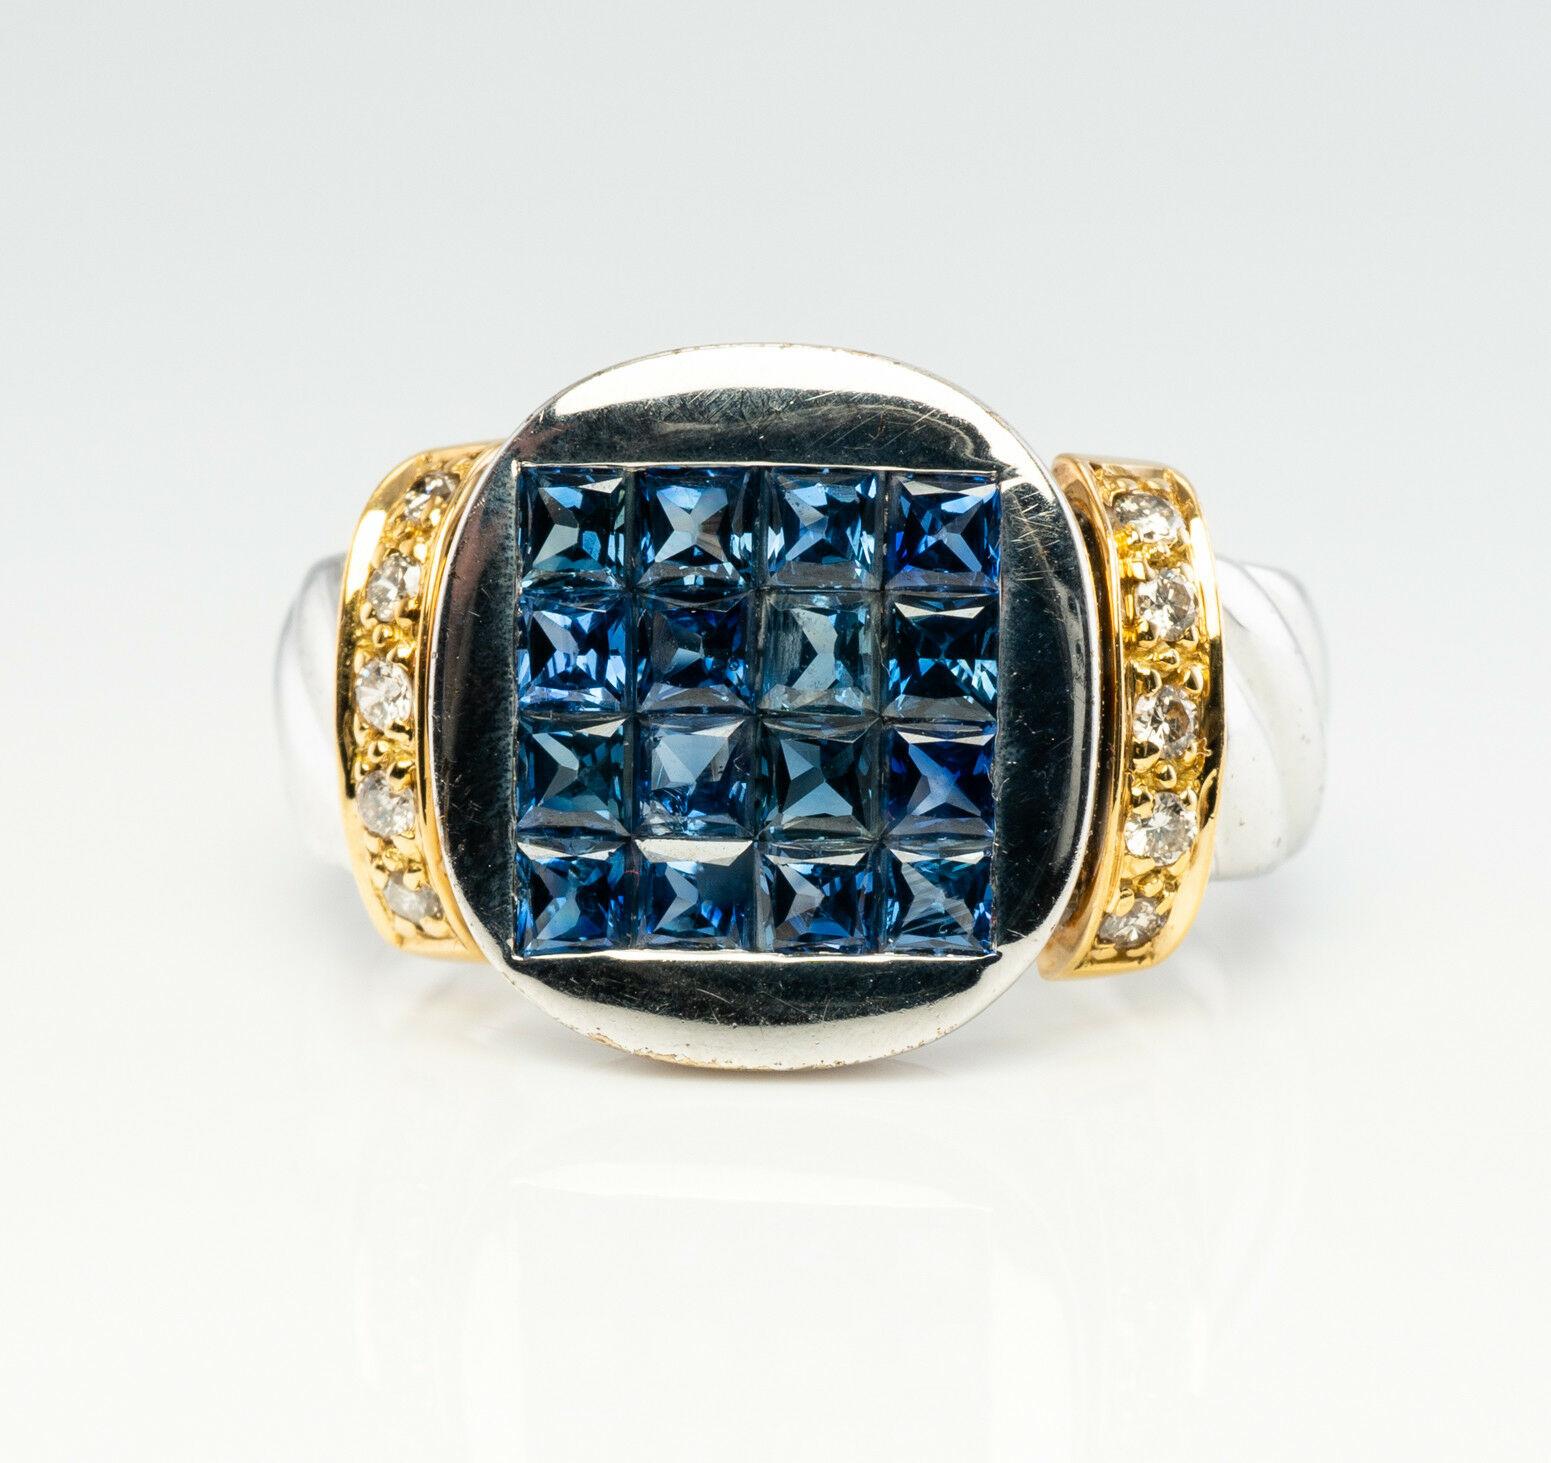 This wonderful piece of estate jewelry is crafted in solid 18K white gold with yellow gold accent. The center presentation is set with 16 square cut genuine Earth mined Sapphires measuring 2mm. The total weight for those clean and transparent gems